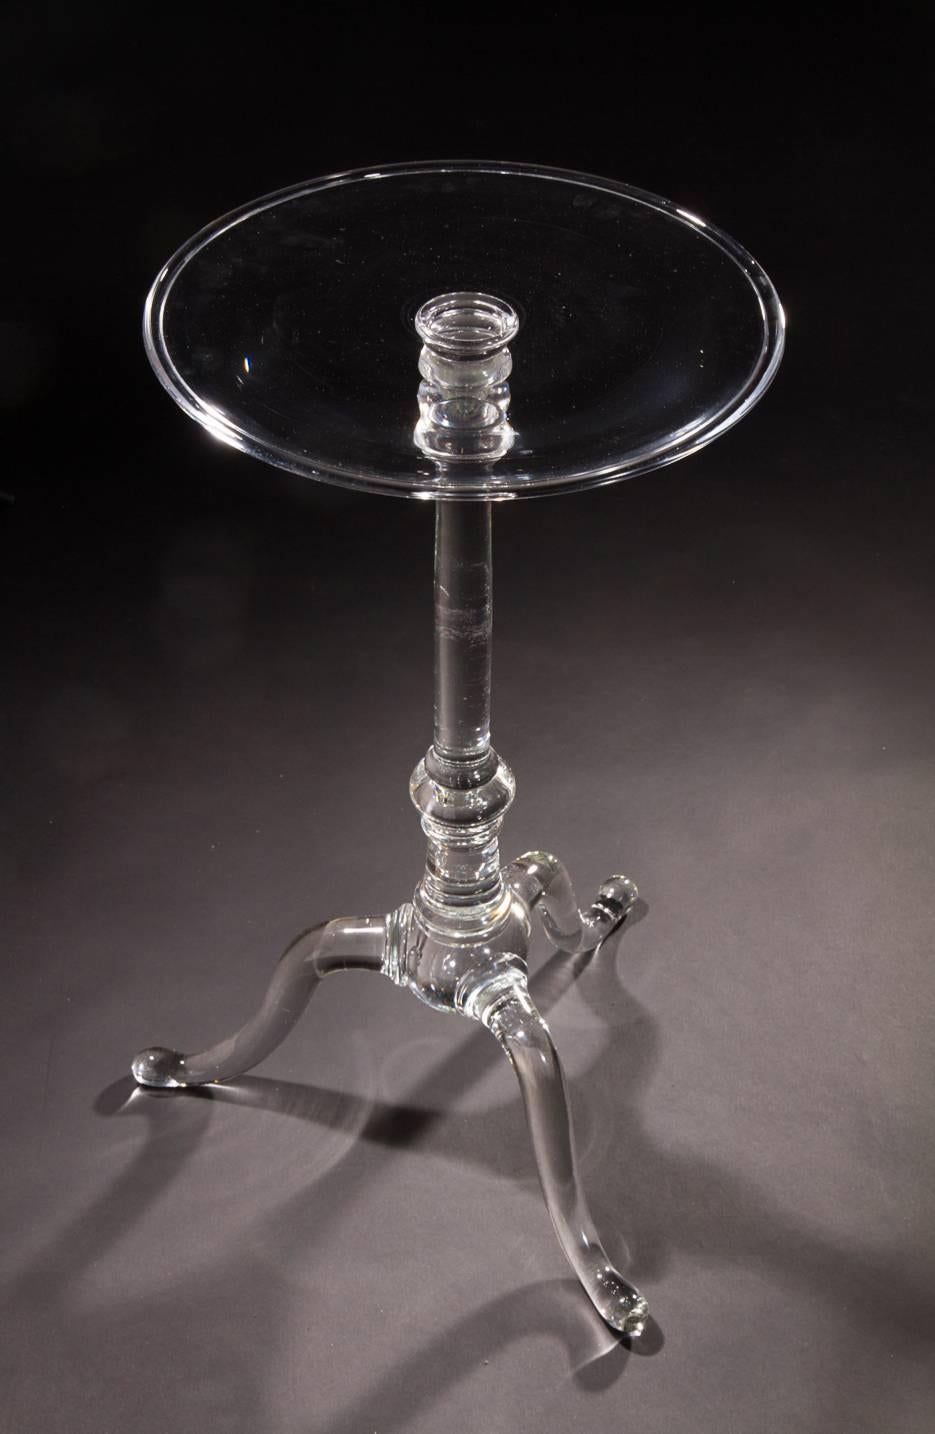 The central pillar issuing tripodal legs and pad feet, the table top of simple cylindrical form. The clarity of the glass is remarkable, as is the size of the table, which is completely handblown. Art Reed's table is a tour-de-force of the